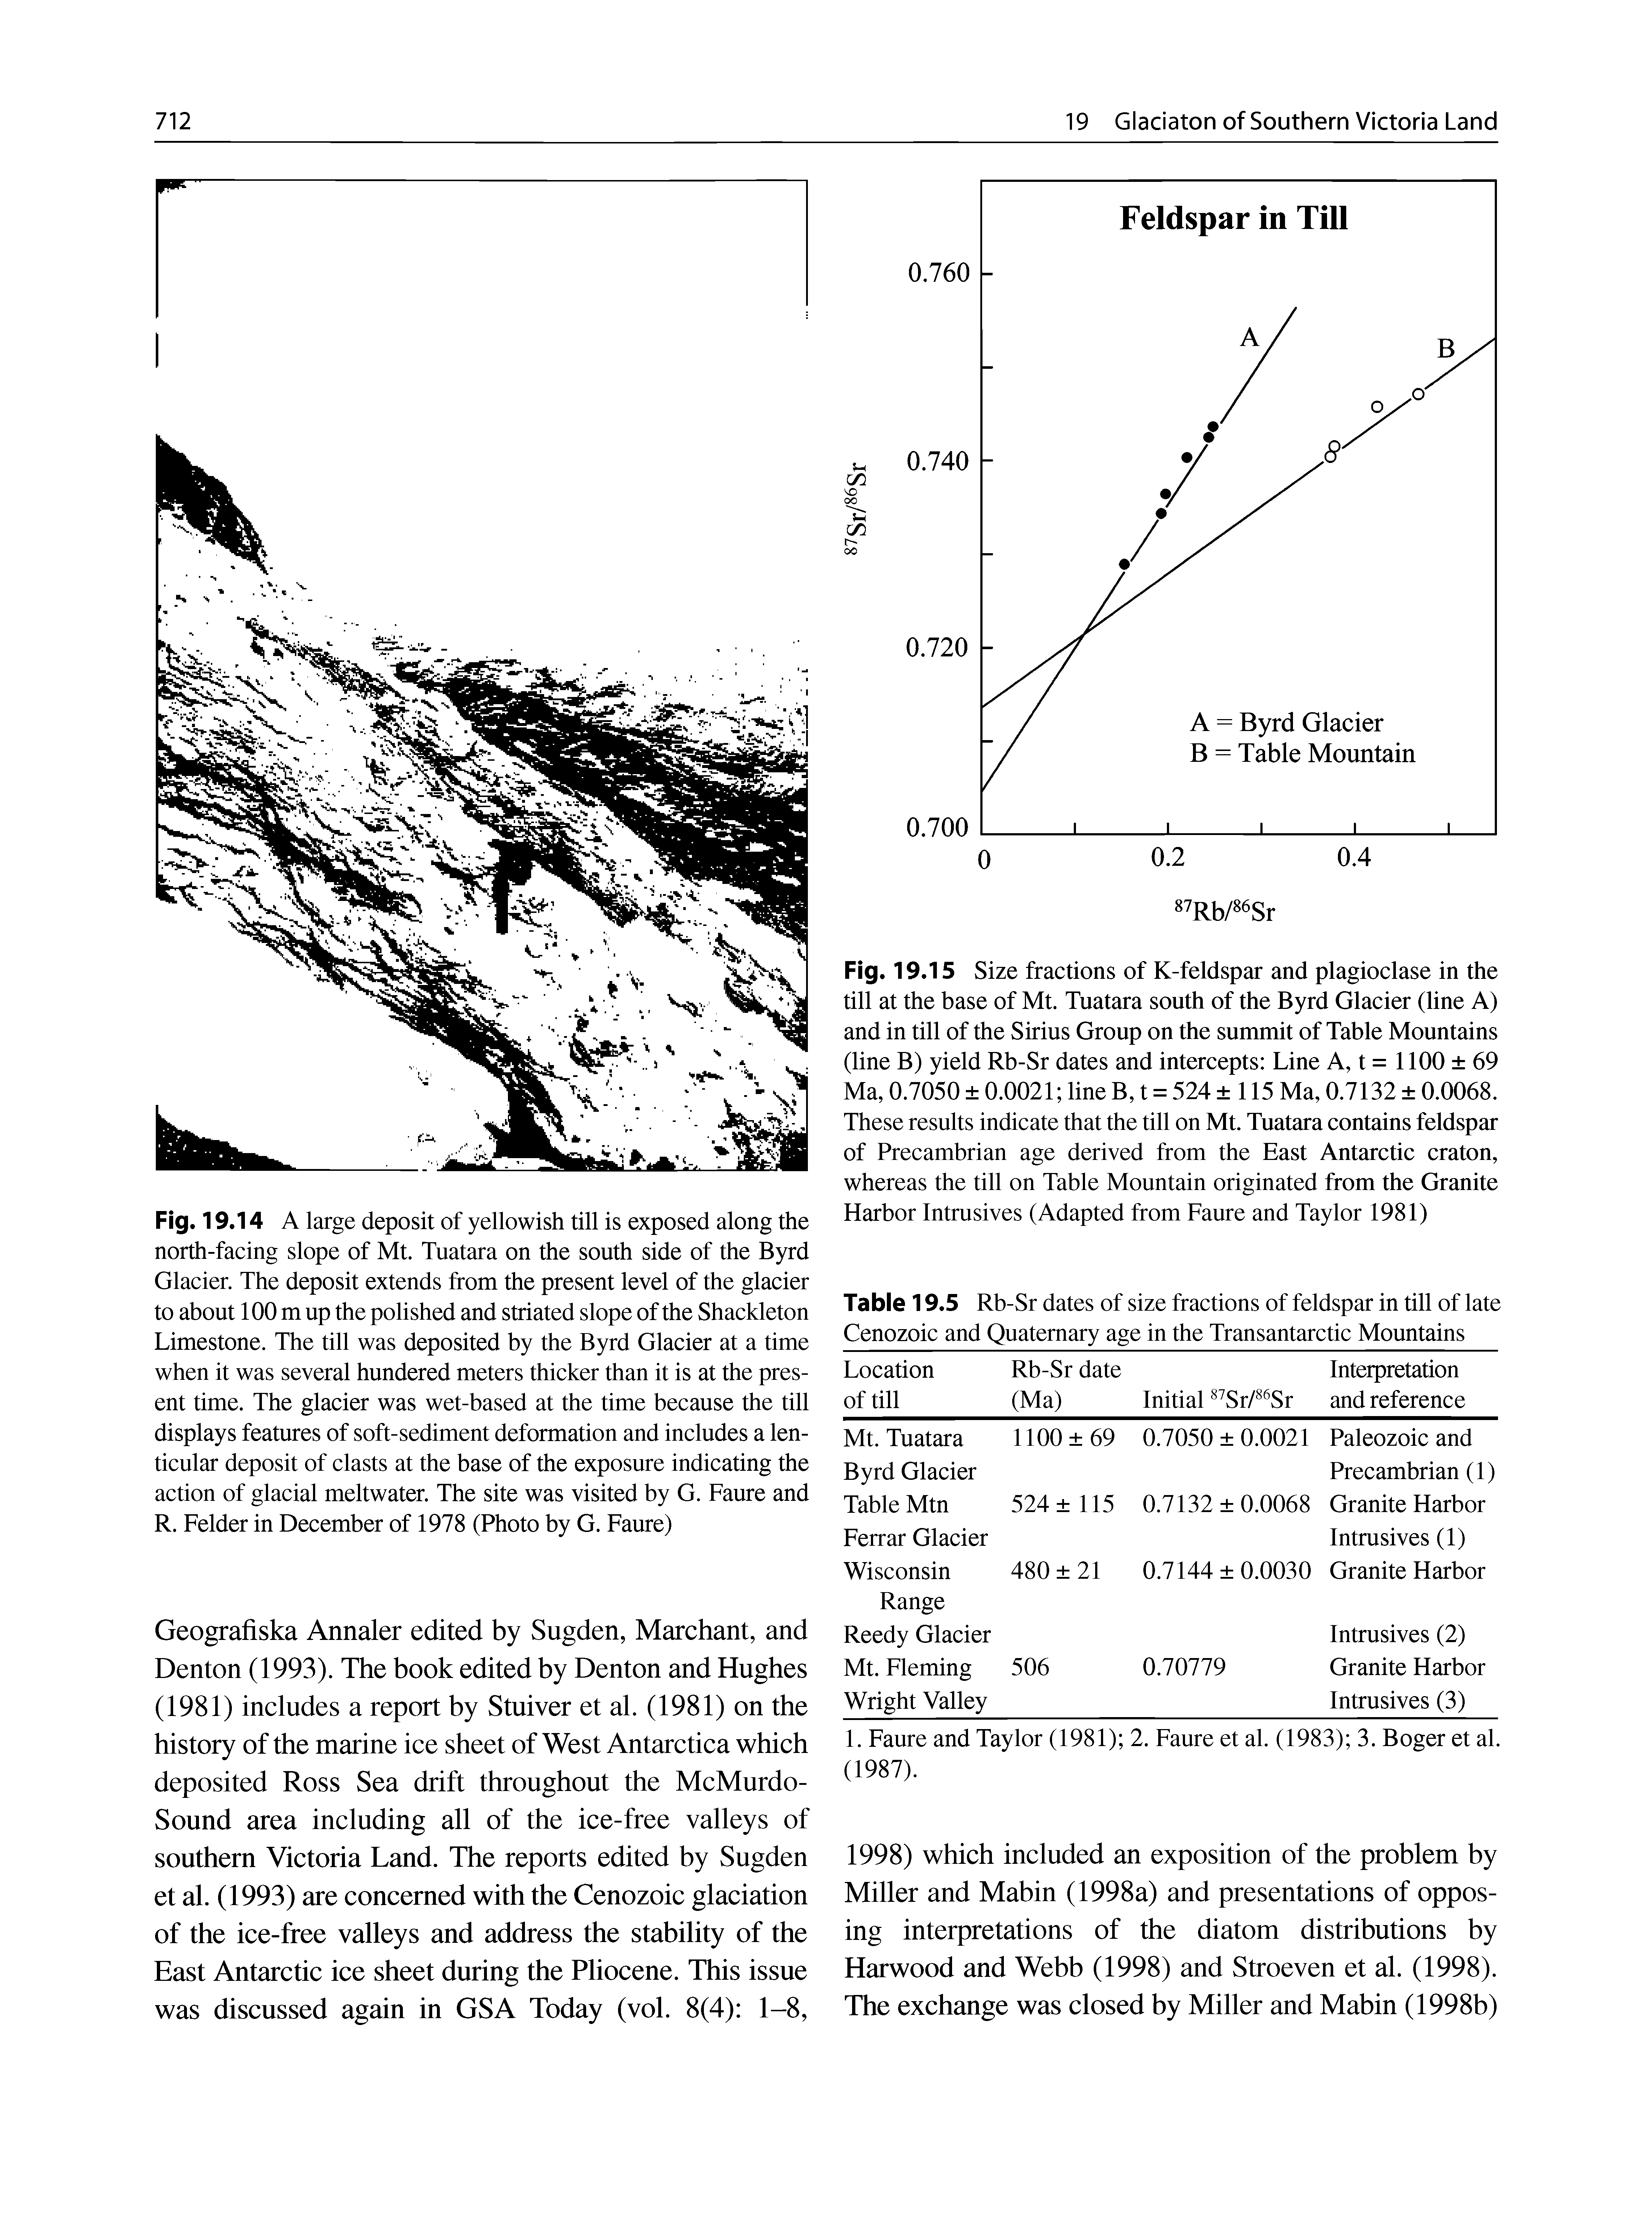 Fig. 19.14 A large deposit of yellowish till is exposed along the north-facing slope of Mt. Tuatara on the south side of the Byrd Glacier. The deposit extends from the present level of the glacier to about 100 m up the polished and striated slope of the Shackleton Limestone. The till was deposited by the Byrd Glacier at a time when it was several hundered meters thicker than it is at the present time. The glacier was wet-based at the time because the till displays features of soft-sediment deformation and includes a lenticular deposit of clasts at the base of the exposure indicating the action of glacial meltwater. The site was visited by G. Faure and R. Felder in December of 1978 (Photo by G. Faure)...